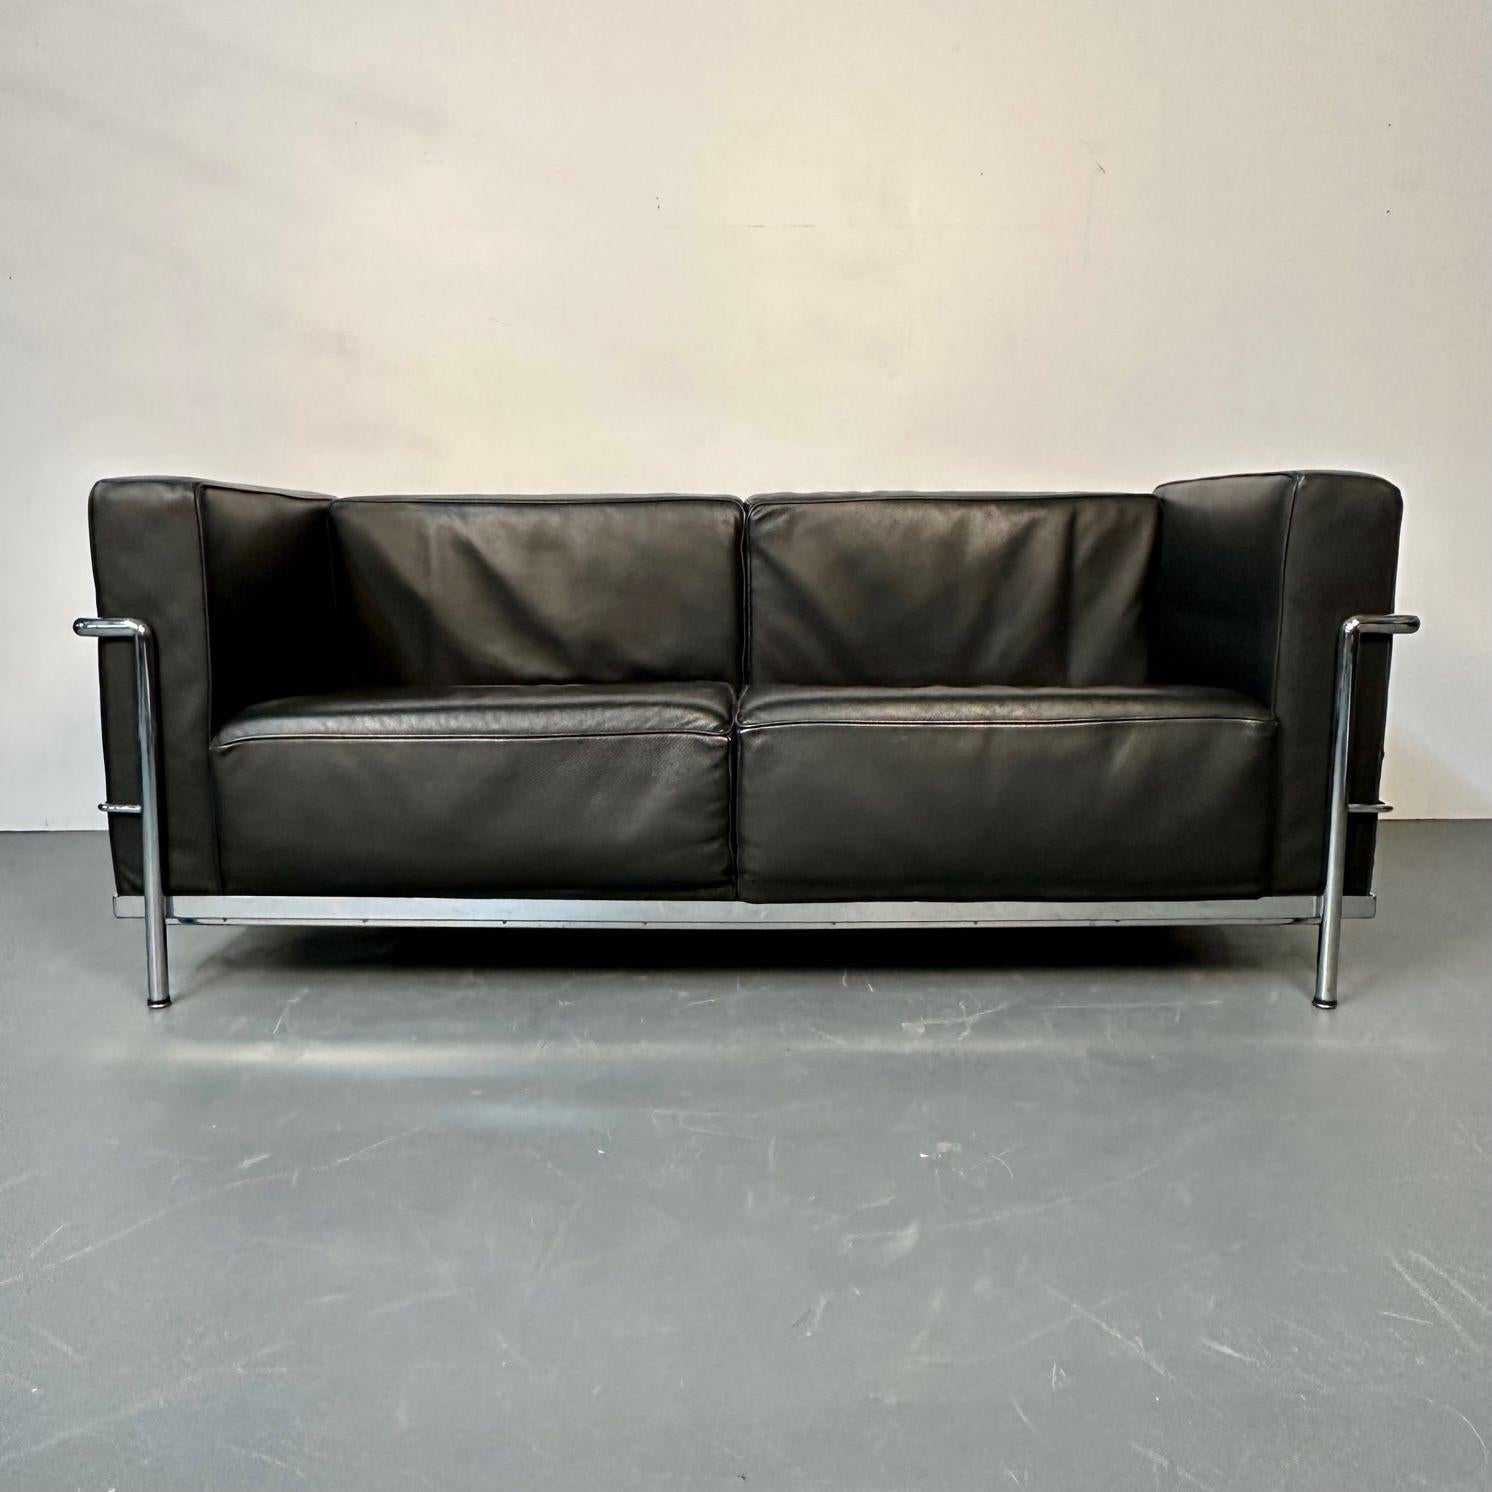 Italian Mid-Century Modern LC2 Sofa by Le Corbusier, Black Leather, Two Seater, Perriand